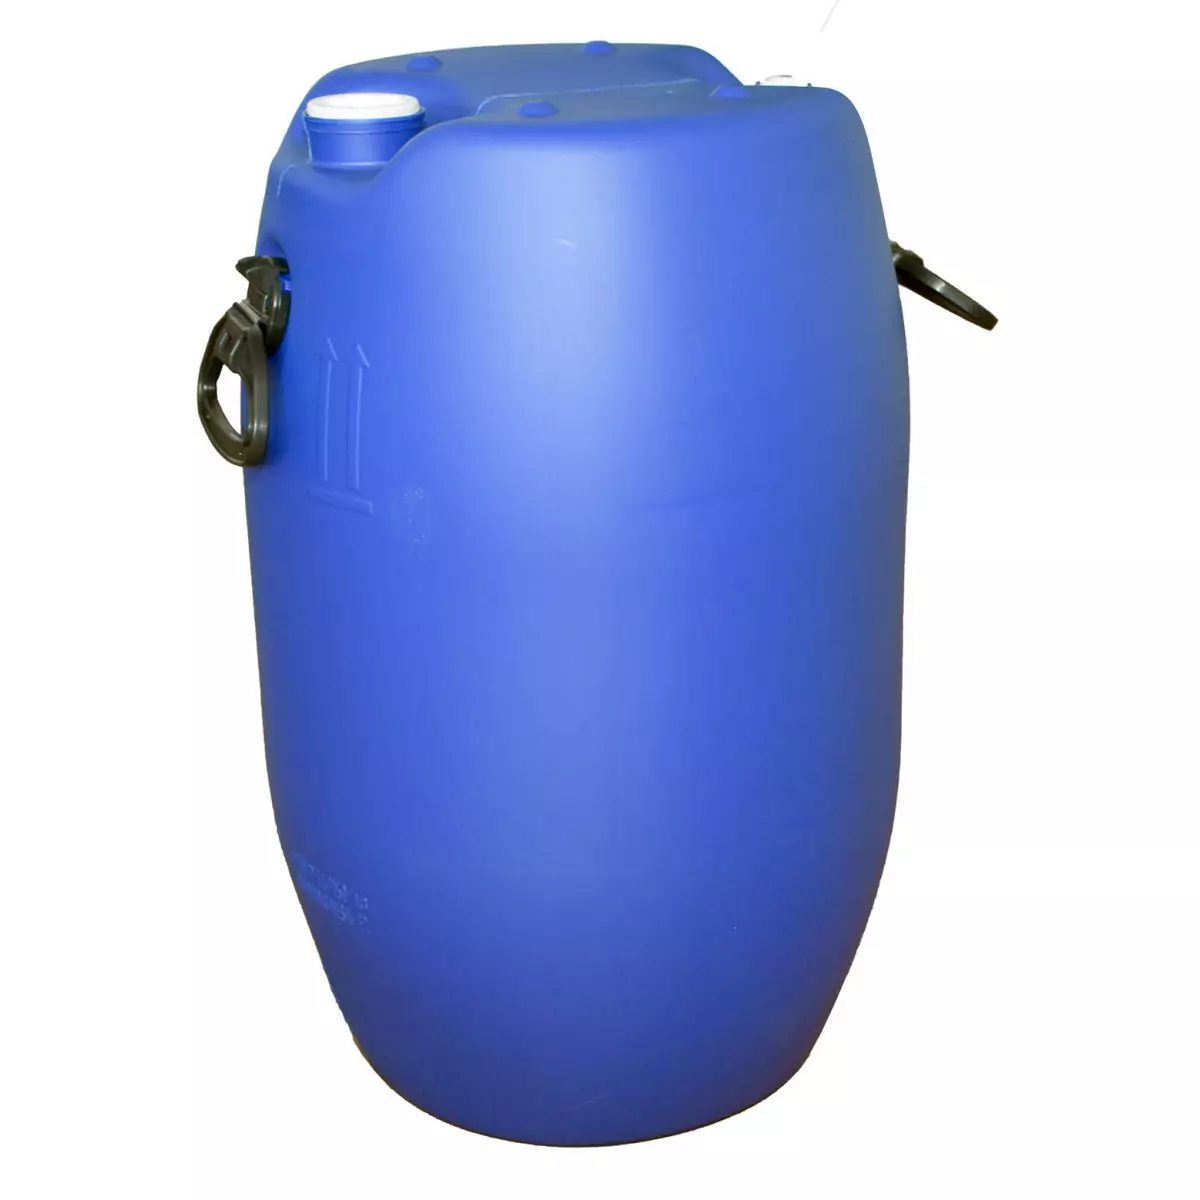 Was 60 liters blue to bungs